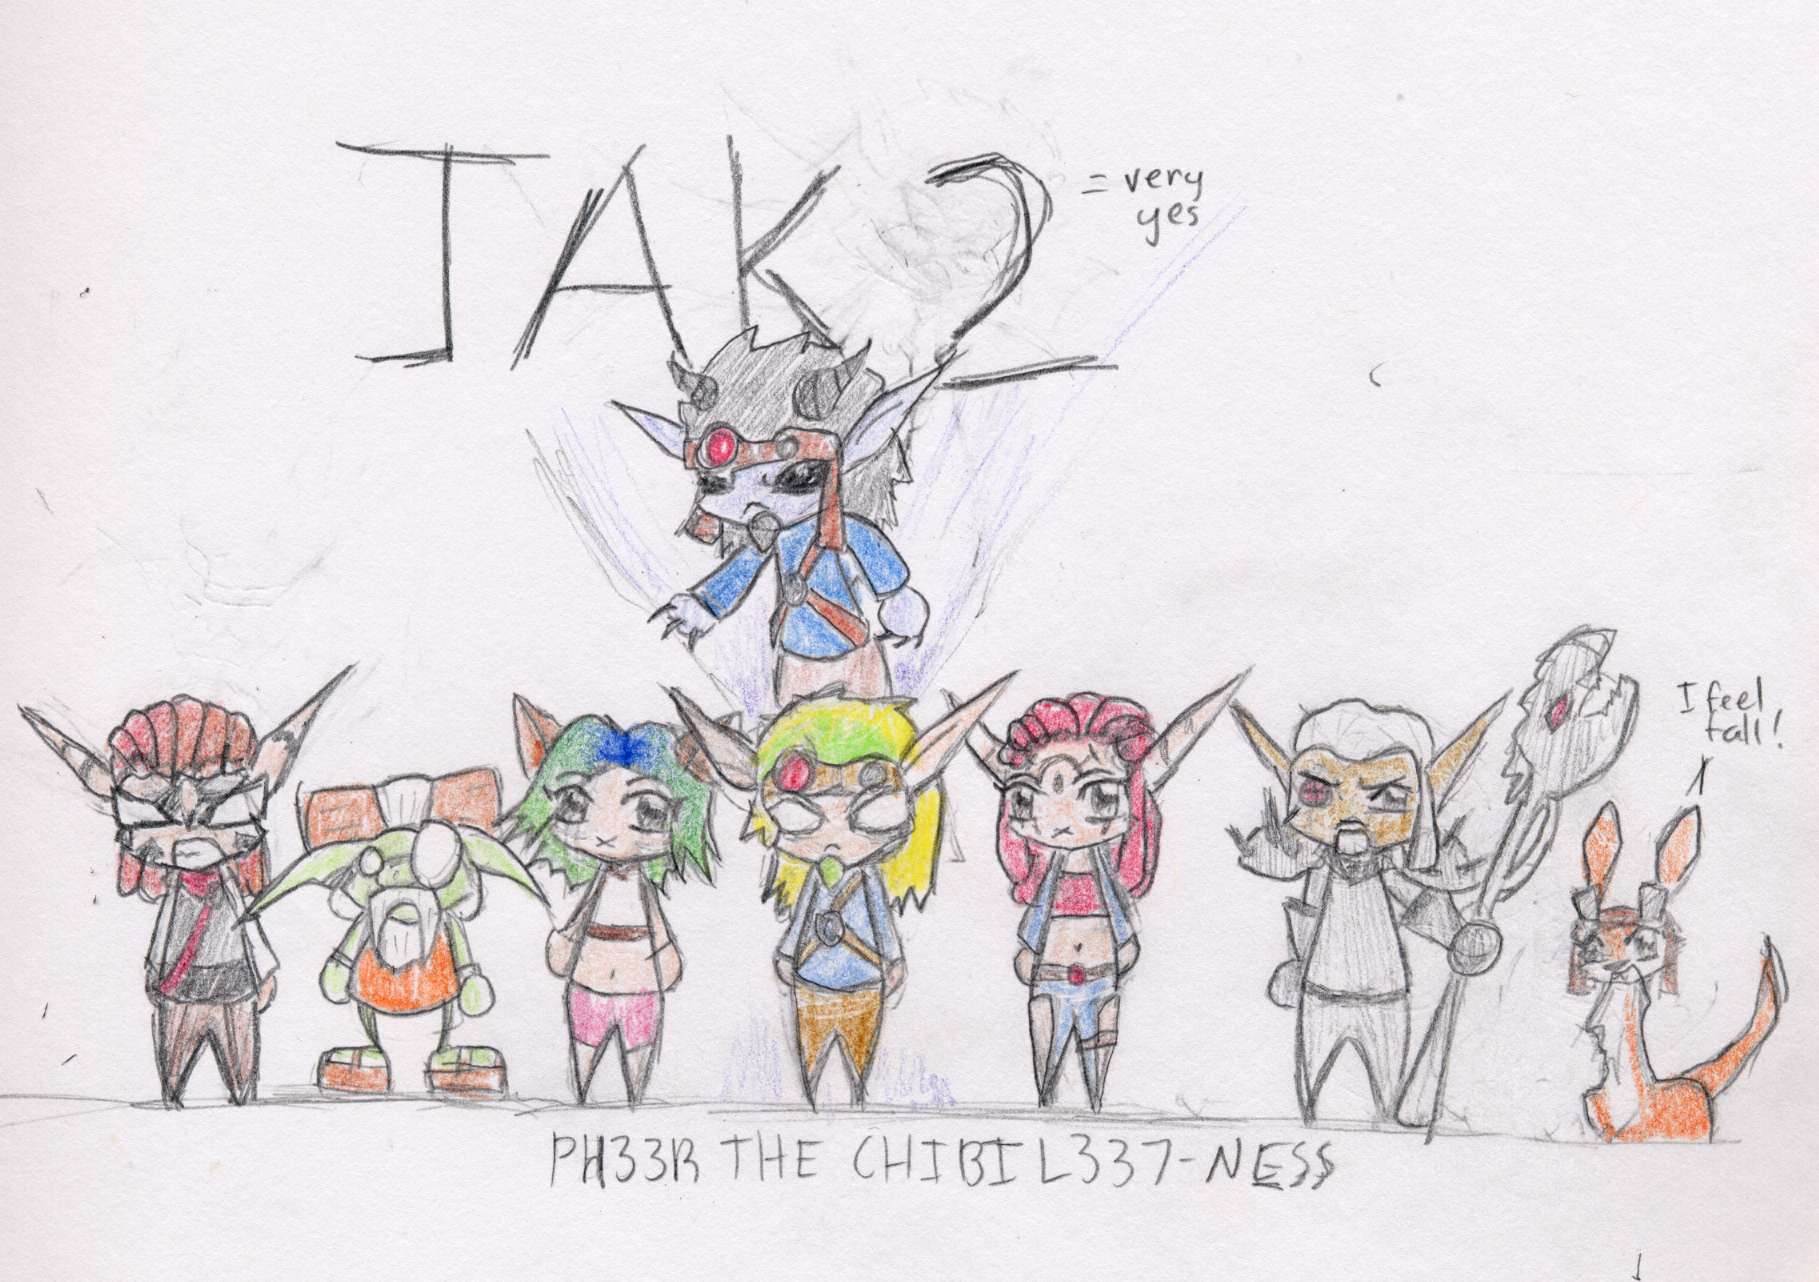 Chibi Cast *equals* Very Yes by alchemist151